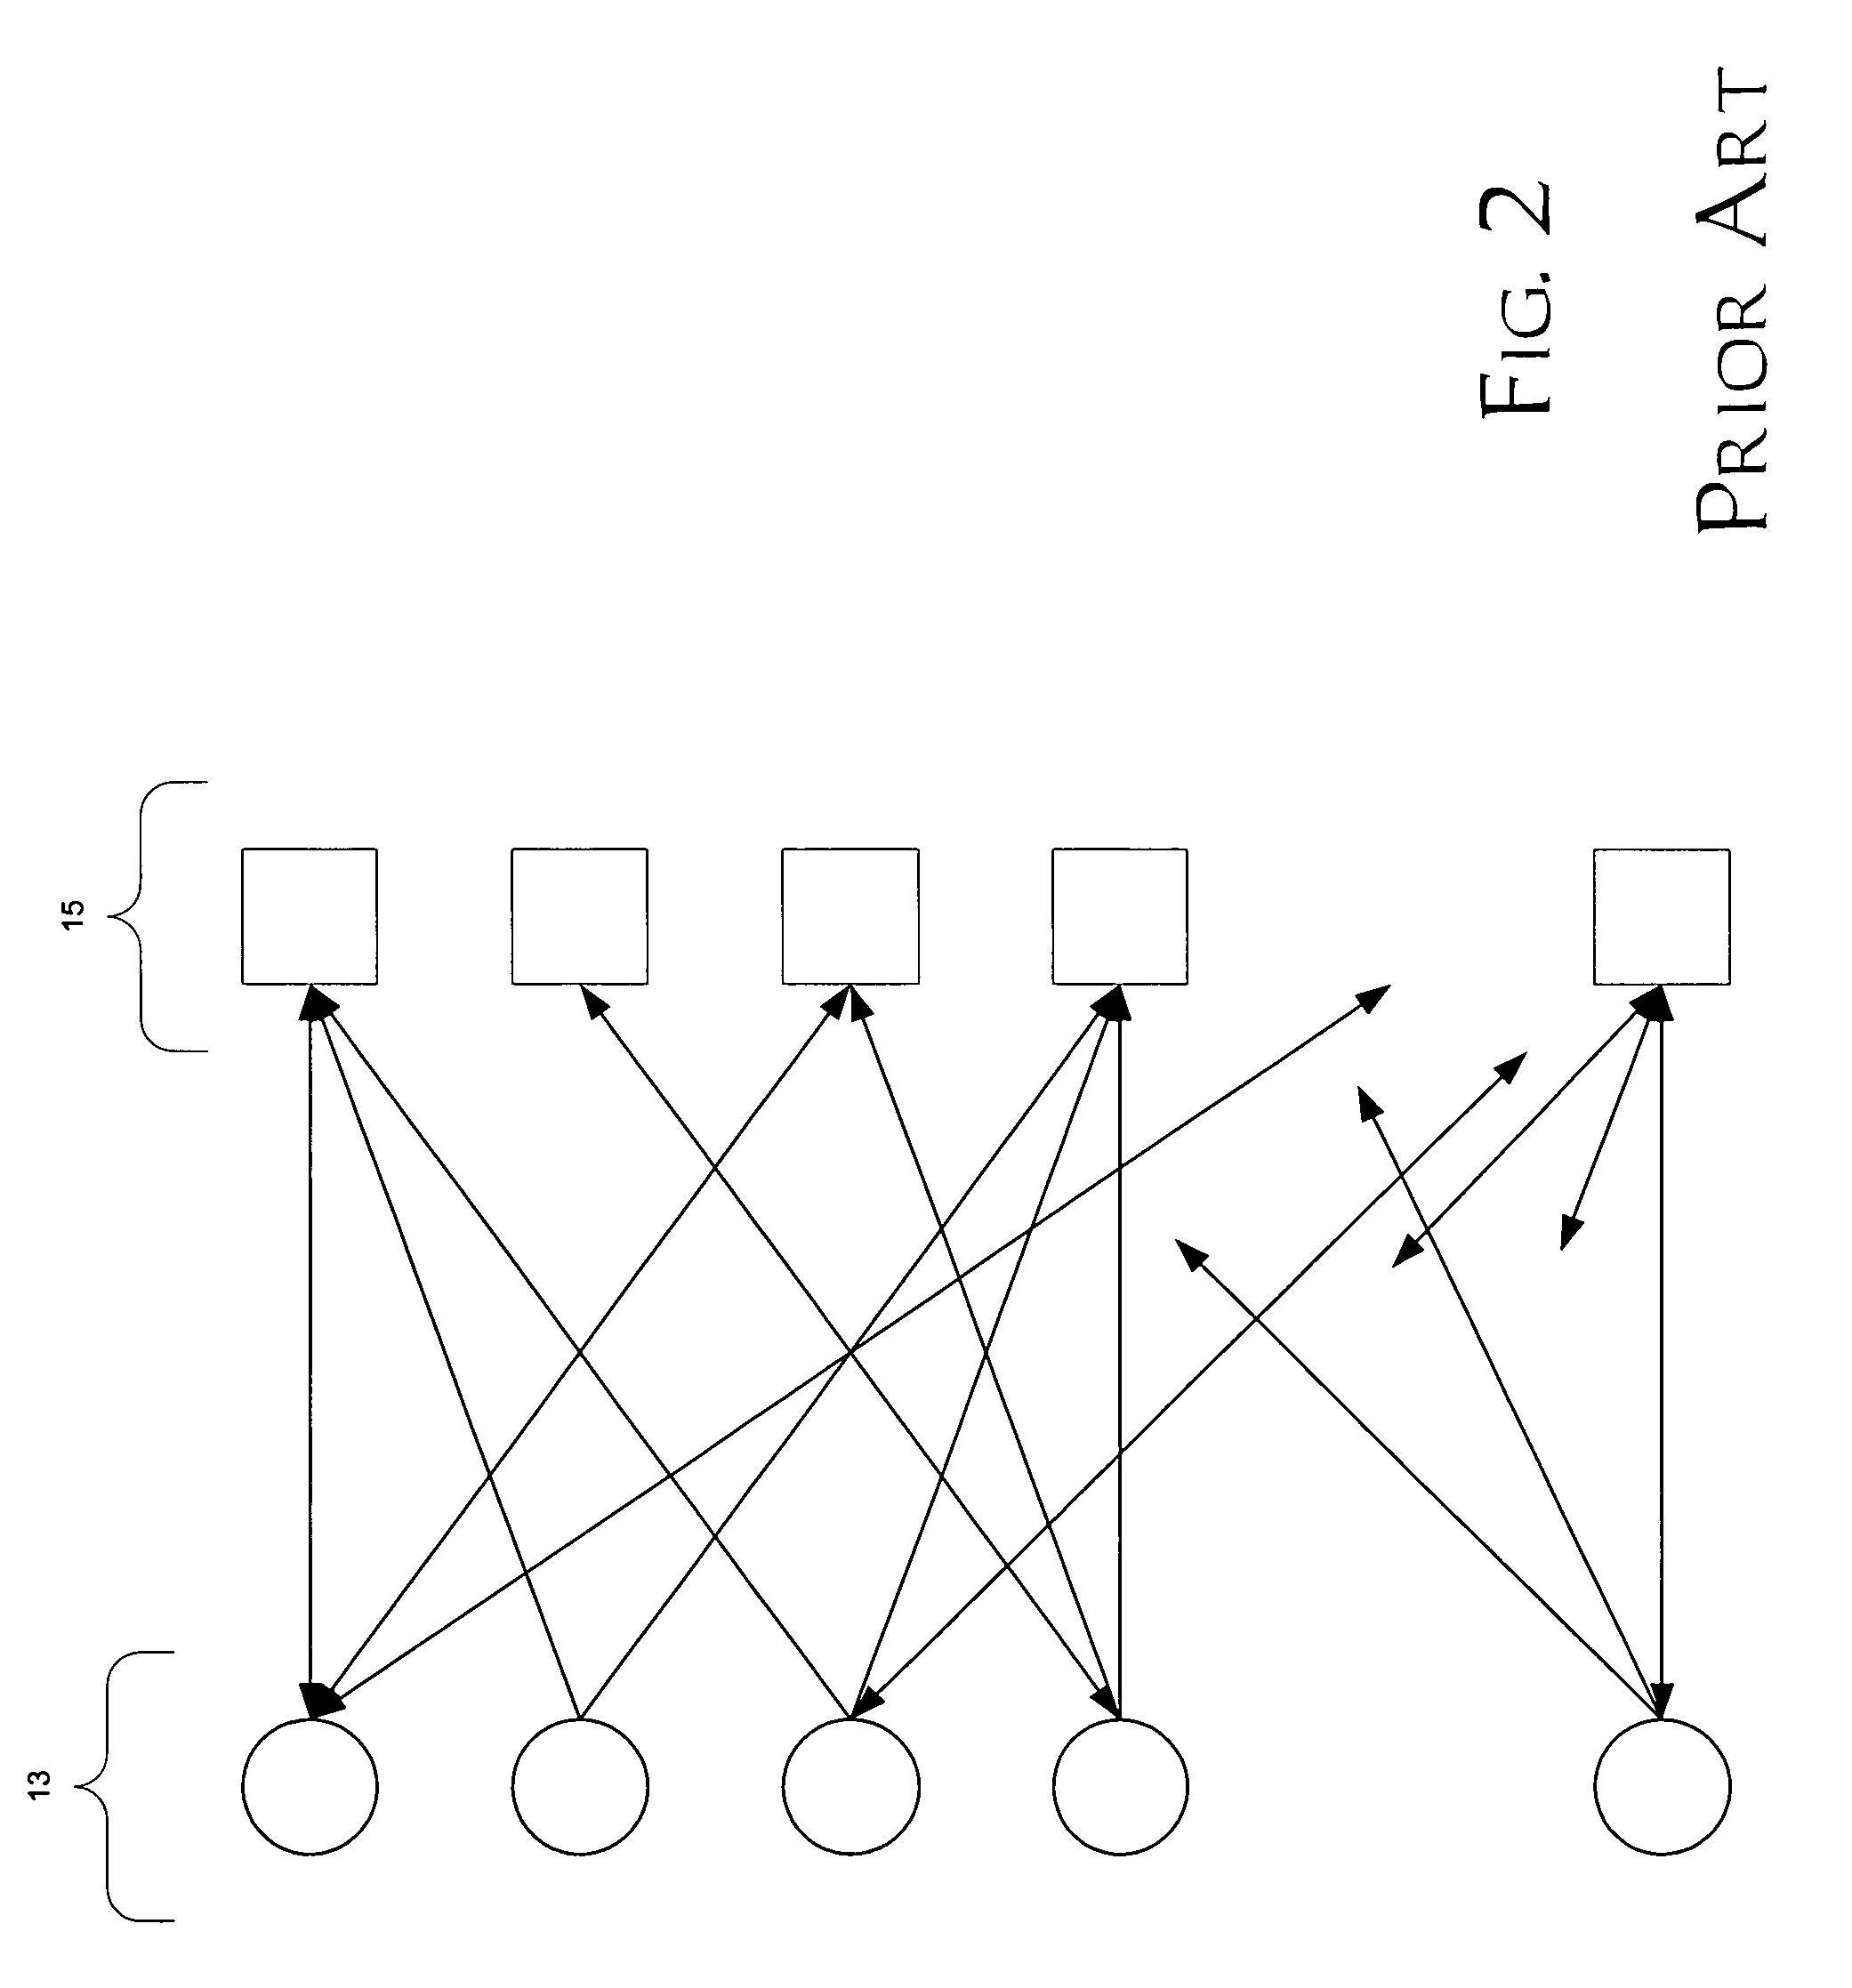 Accelerating convergence in an iterative decoder